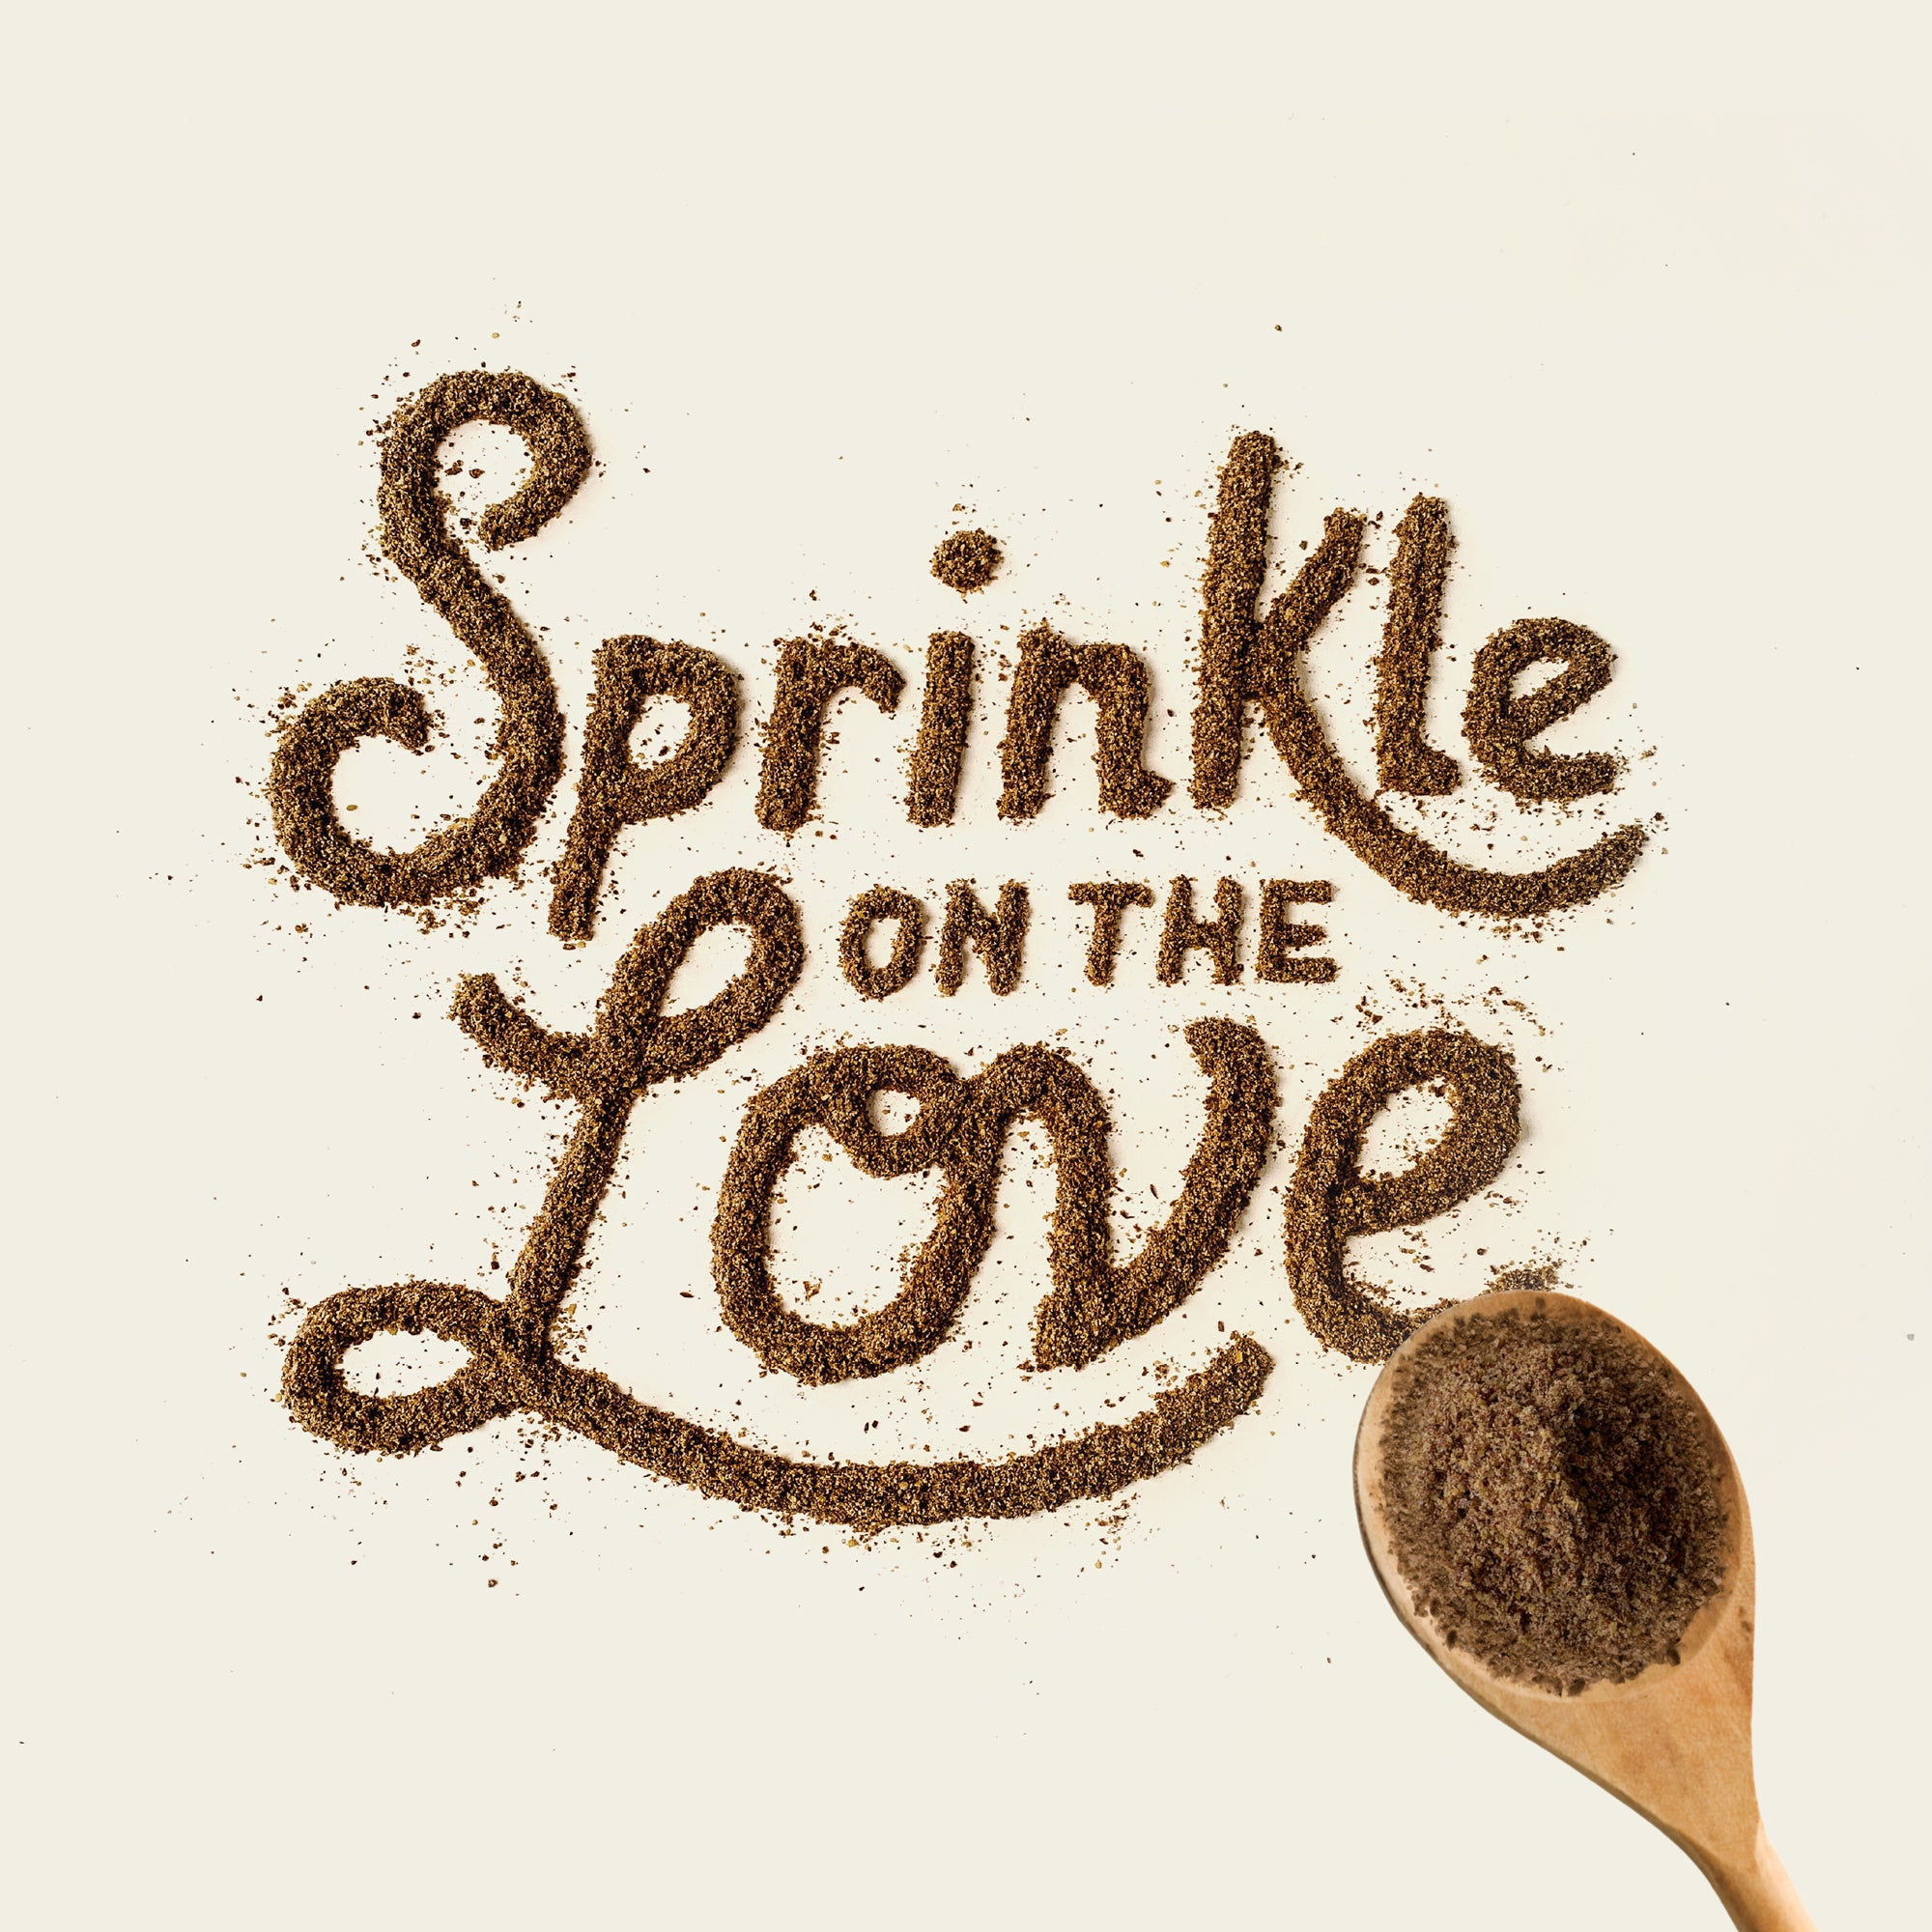 Sprinkle on the Love with The Missing Link supplement powders